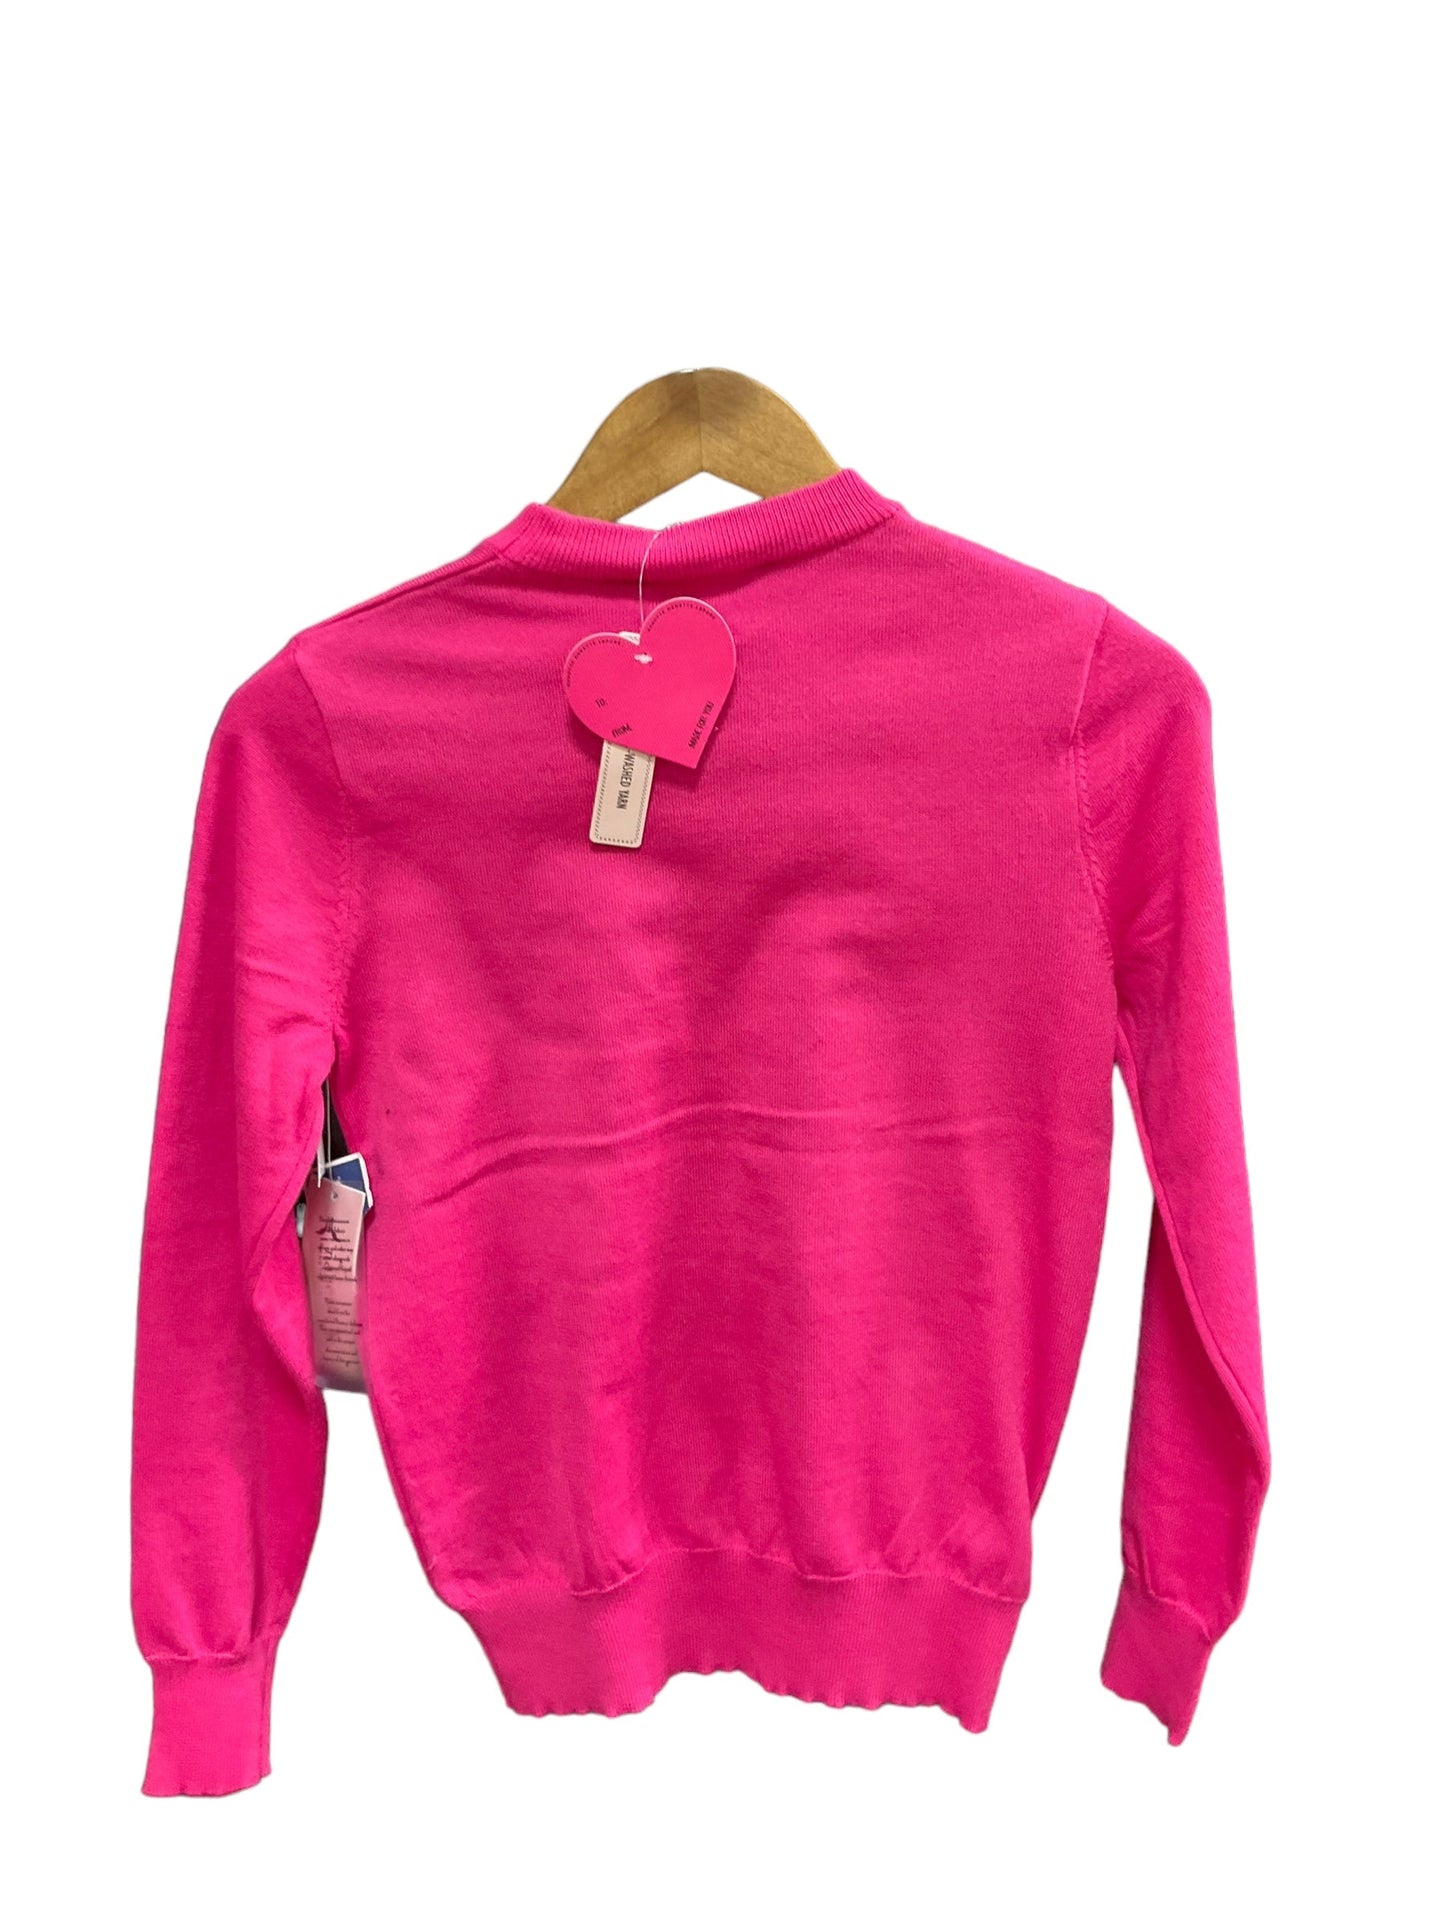 Sweater By Nanette Lepore  Size: S